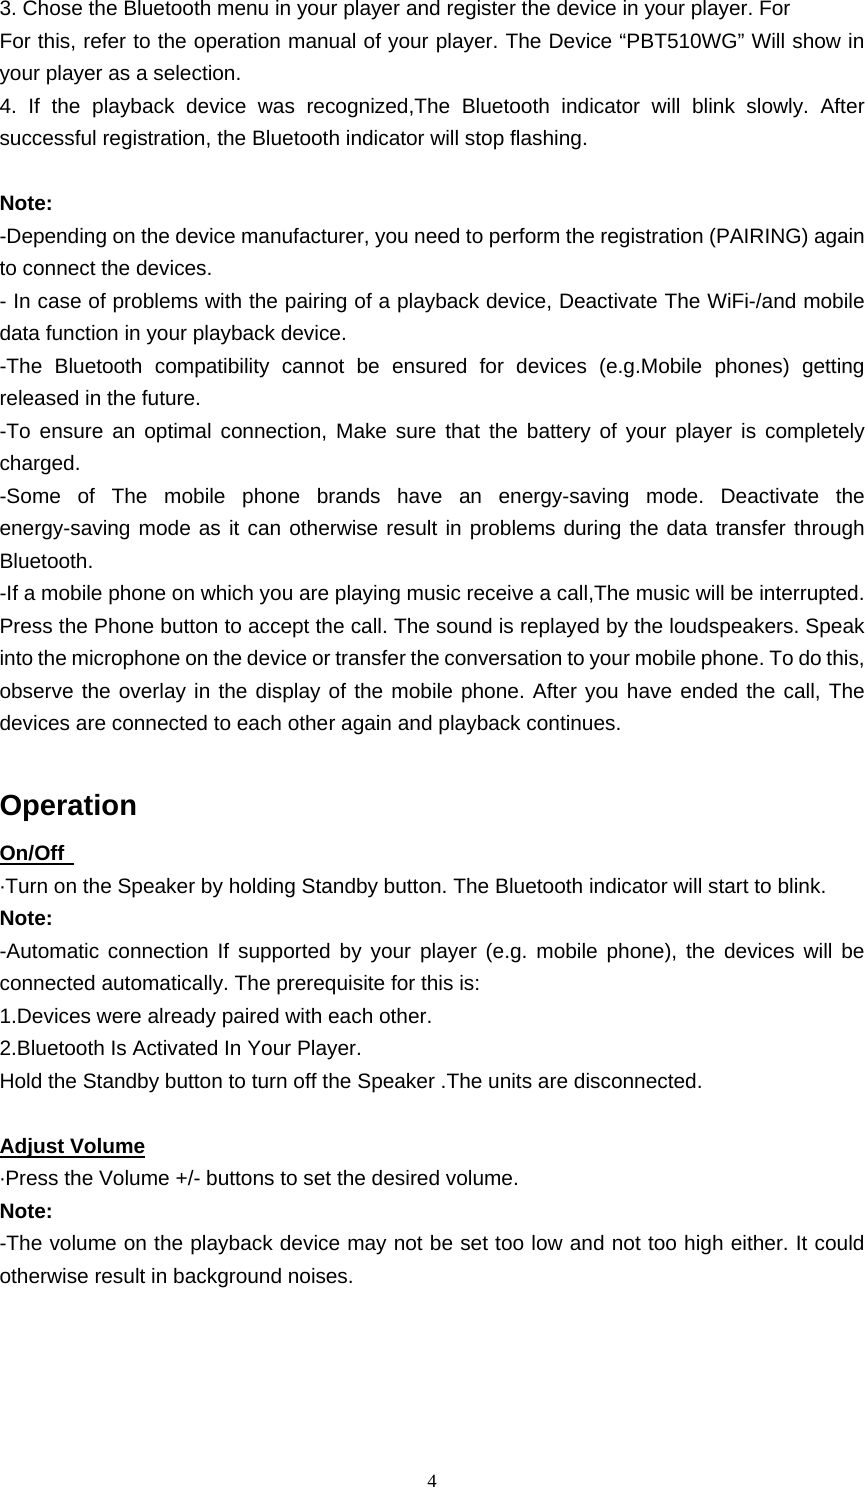   43. Chose the Bluetooth menu in your player and register the device in your player. For For this, refer to the operation manual of your player. The Device “PBT510WG” Will show in your player as a selection. 4. If the playback device was recognized,The Bluetooth indicator will blink slowly. After successful registration, the Bluetooth indicator will stop flashing.    Note: -Depending on the device manufacturer, you need to perform the registration (PAIRING) again to connect the devices. - In case of problems with the pairing of a playback device, Deactivate The WiFi-/and mobile data function in your playback device. -The Bluetooth compatibility cannot be ensured for devices (e.g.Mobile phones) getting released in the future. -To ensure an optimal connection, Make sure that the battery of your player is completely charged. -Some of The mobile phone brands have an energy-saving mode. Deactivate the energy-saving mode as it can otherwise result in problems during the data transfer through Bluetooth. -If a mobile phone on which you are playing music receive a call,The music will be interrupted. Press the Phone button to accept the call. The sound is replayed by the loudspeakers. Speak into the microphone on the device or transfer the conversation to your mobile phone. To do this, observe the overlay in the display of the mobile phone. After you have ended the call, The devices are connected to each other again and playback continues.    Operation On/Off   ·Turn on the Speaker by holding Standby button. The Bluetooth indicator will start to blink.   Note:  -Automatic connection If supported by your player (e.g. mobile phone), the devices will be connected automatically. The prerequisite for this is:   1.Devices were already paired with each other. 2.Bluetooth Is Activated In Your Player.   Hold the Standby button to turn off the Speaker .The units are disconnected.  Adjust Volume ·Press the Volume +/- buttons to set the desired volume.   Note: -The volume on the playback device may not be set too low and not too high either. It could otherwise result in background noises.     